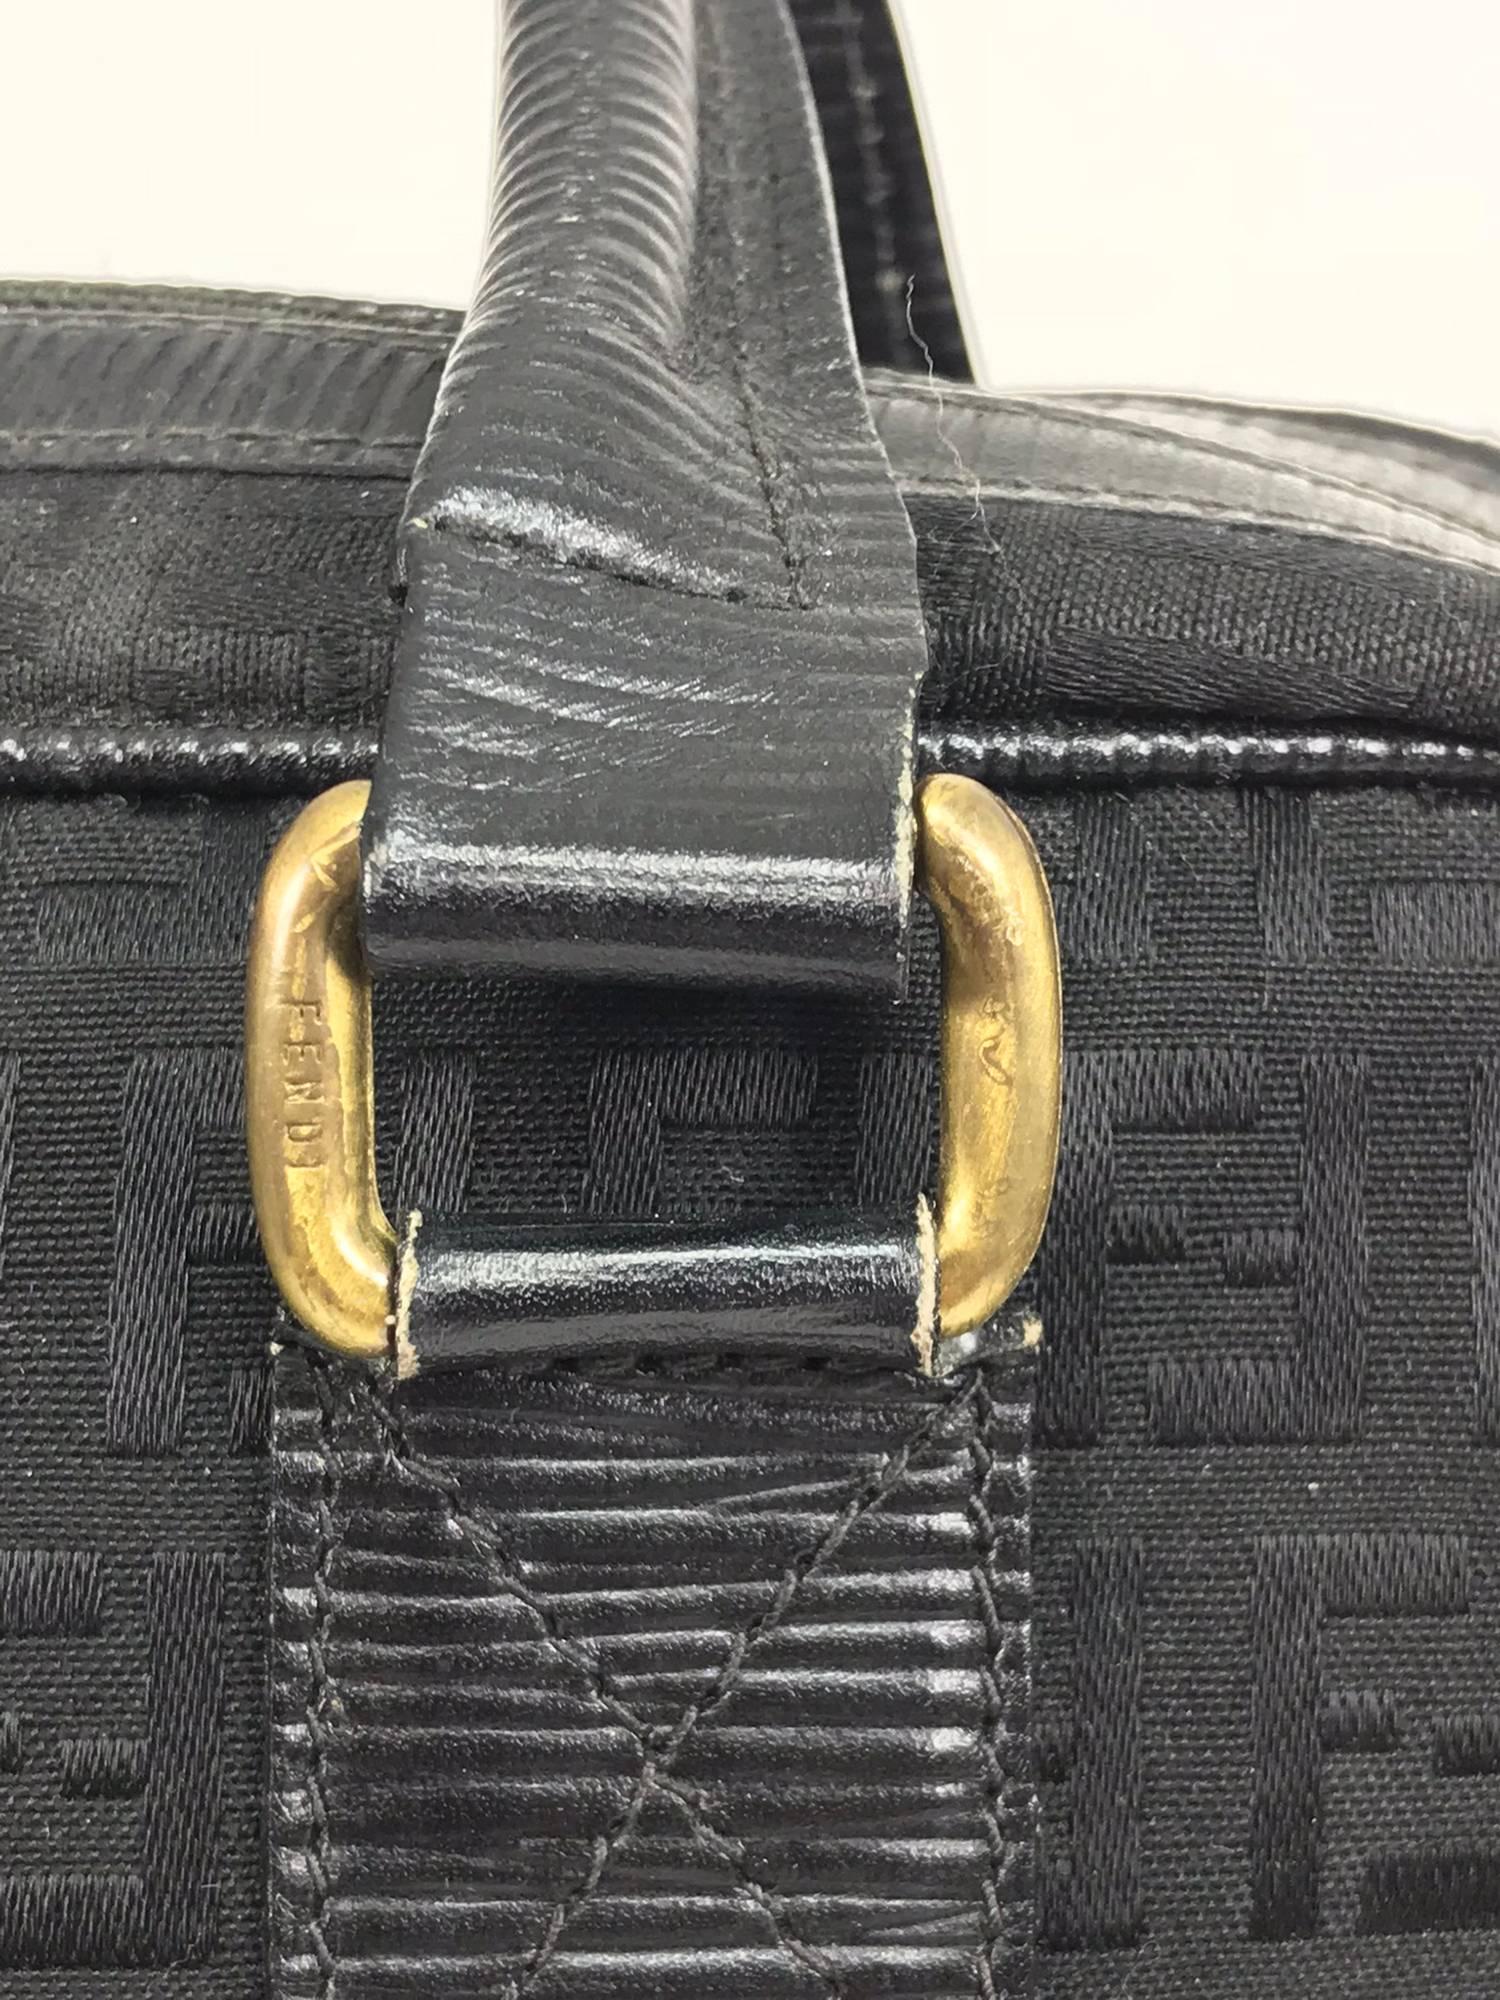 Fendi  black on black logo canvas and leather double handle handbag from the 1970s...Double leather handle bag has a double zipper top closure with a logo pull tabs...Leather trims...Interior in black faux leather with Fendi stamp in gold, a single